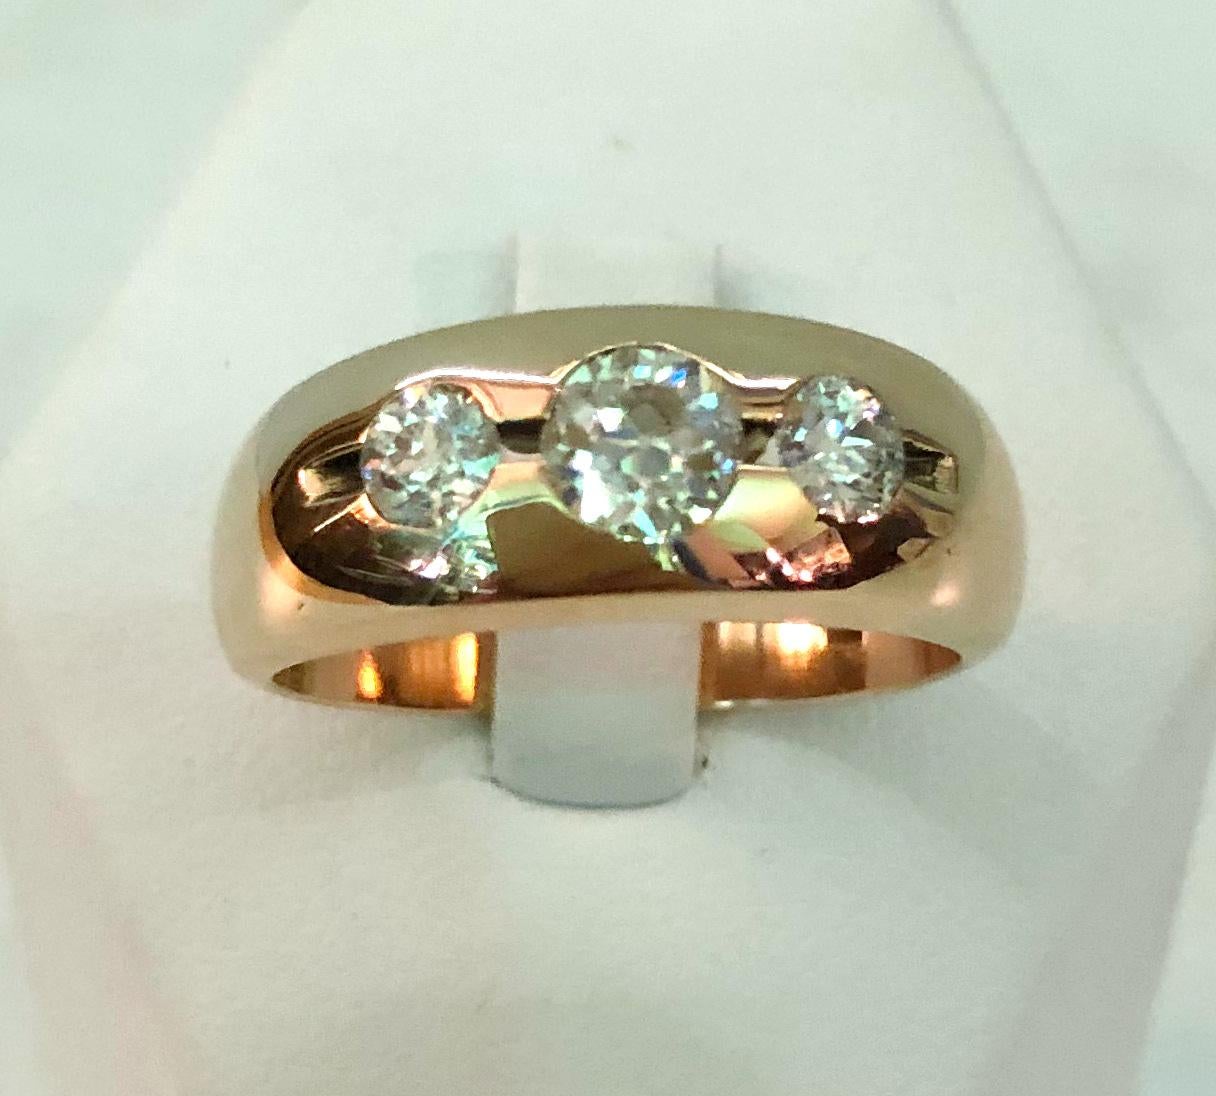 14 karat rose gold ring with 3 brilliant diamonds for a total of 1 karat, Italy 1940-1950s
Ring size US 9.5